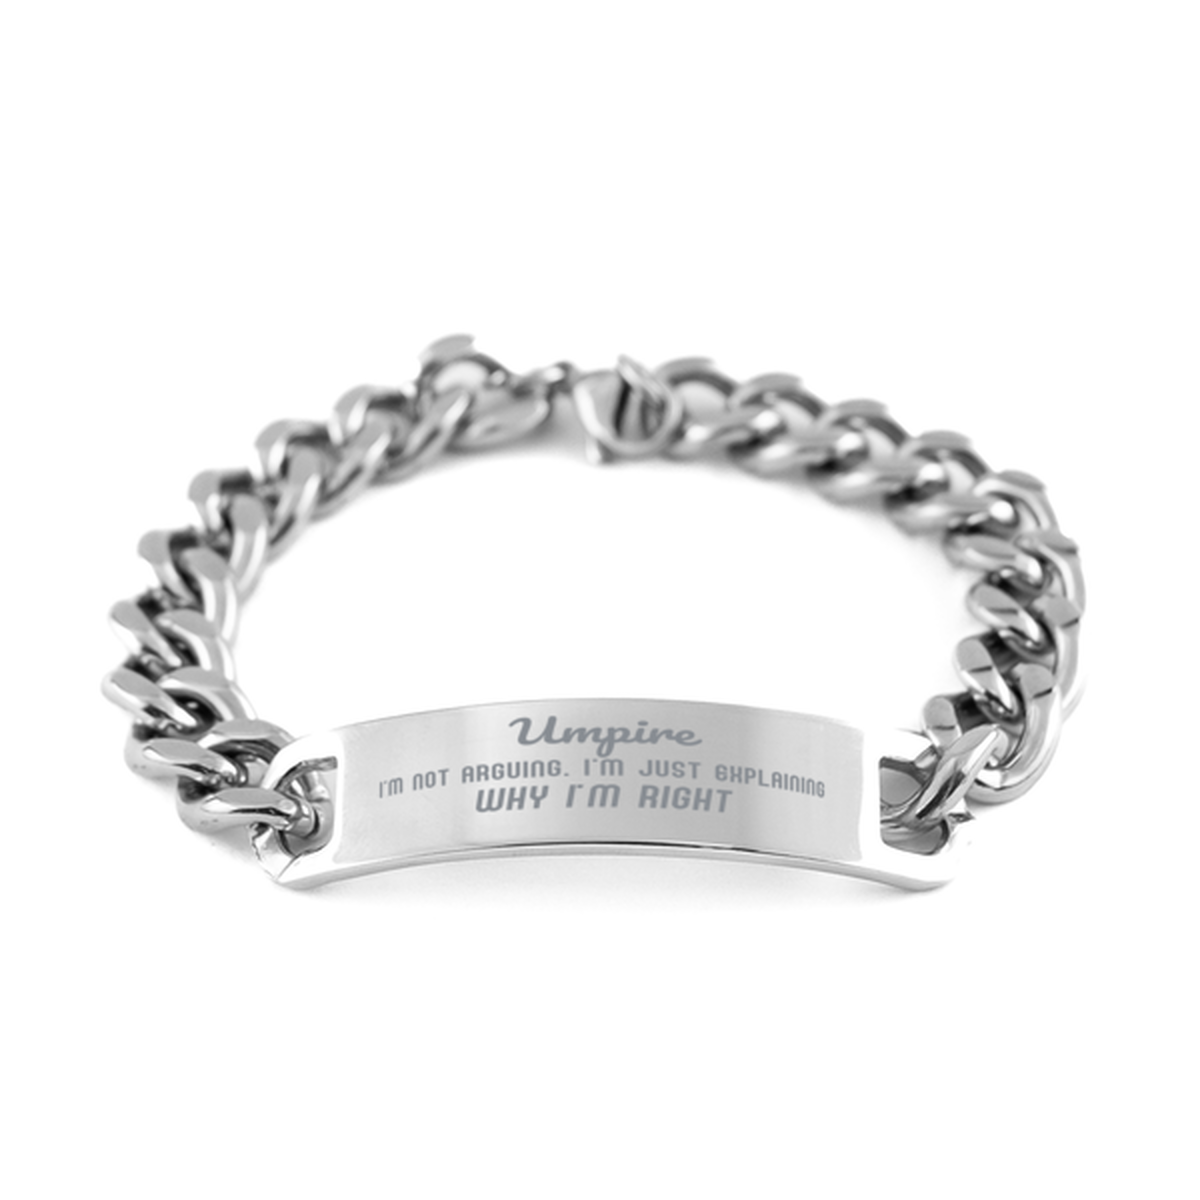 Umpire I'm not Arguing. I'm Just Explaining Why I'm RIGHT Cuban Chain Stainless Steel Bracelet, Graduation Birthday Christmas Umpire Gifts For Umpire Funny Saying Quote Present for Men Women Coworker